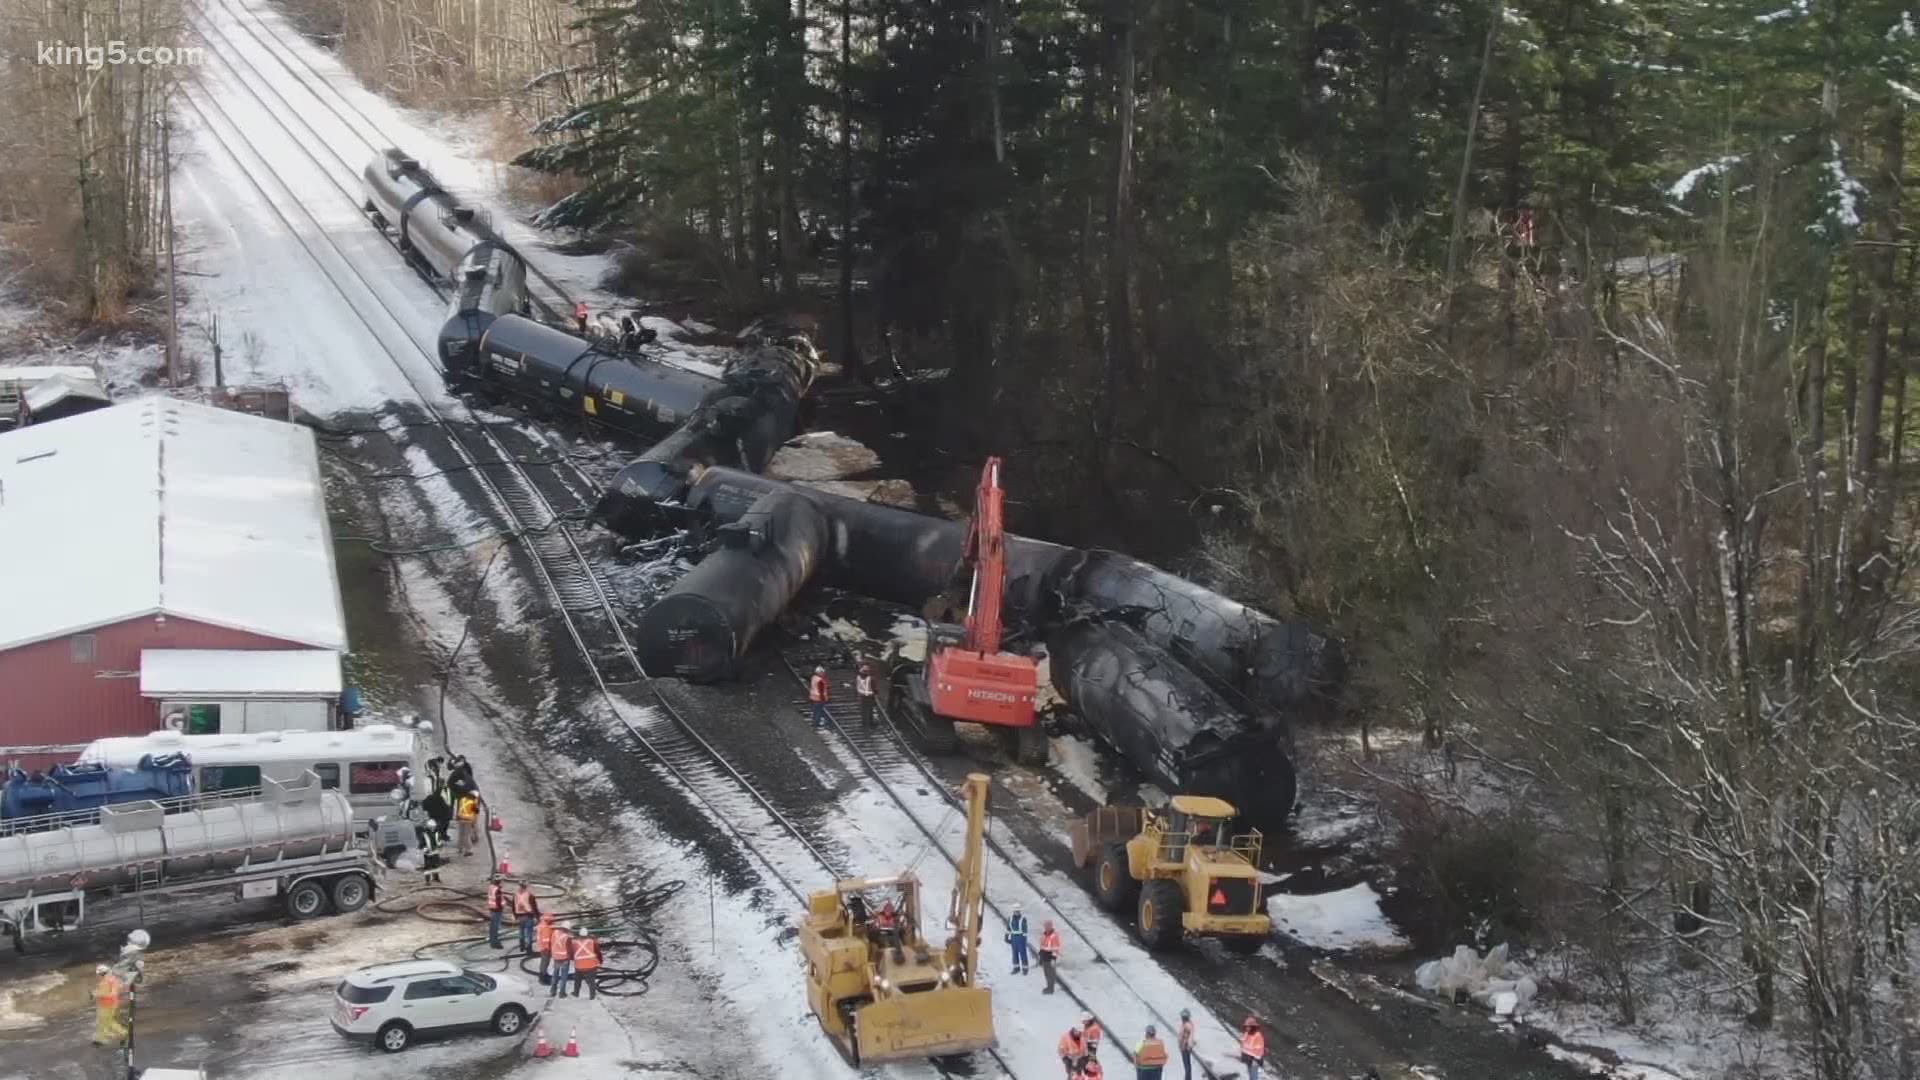 The tanker train hauling crude oil derailed near Custer on Tuesday. Crews are working through the weekend on cleanup and plan to remove the cars starting Monday.